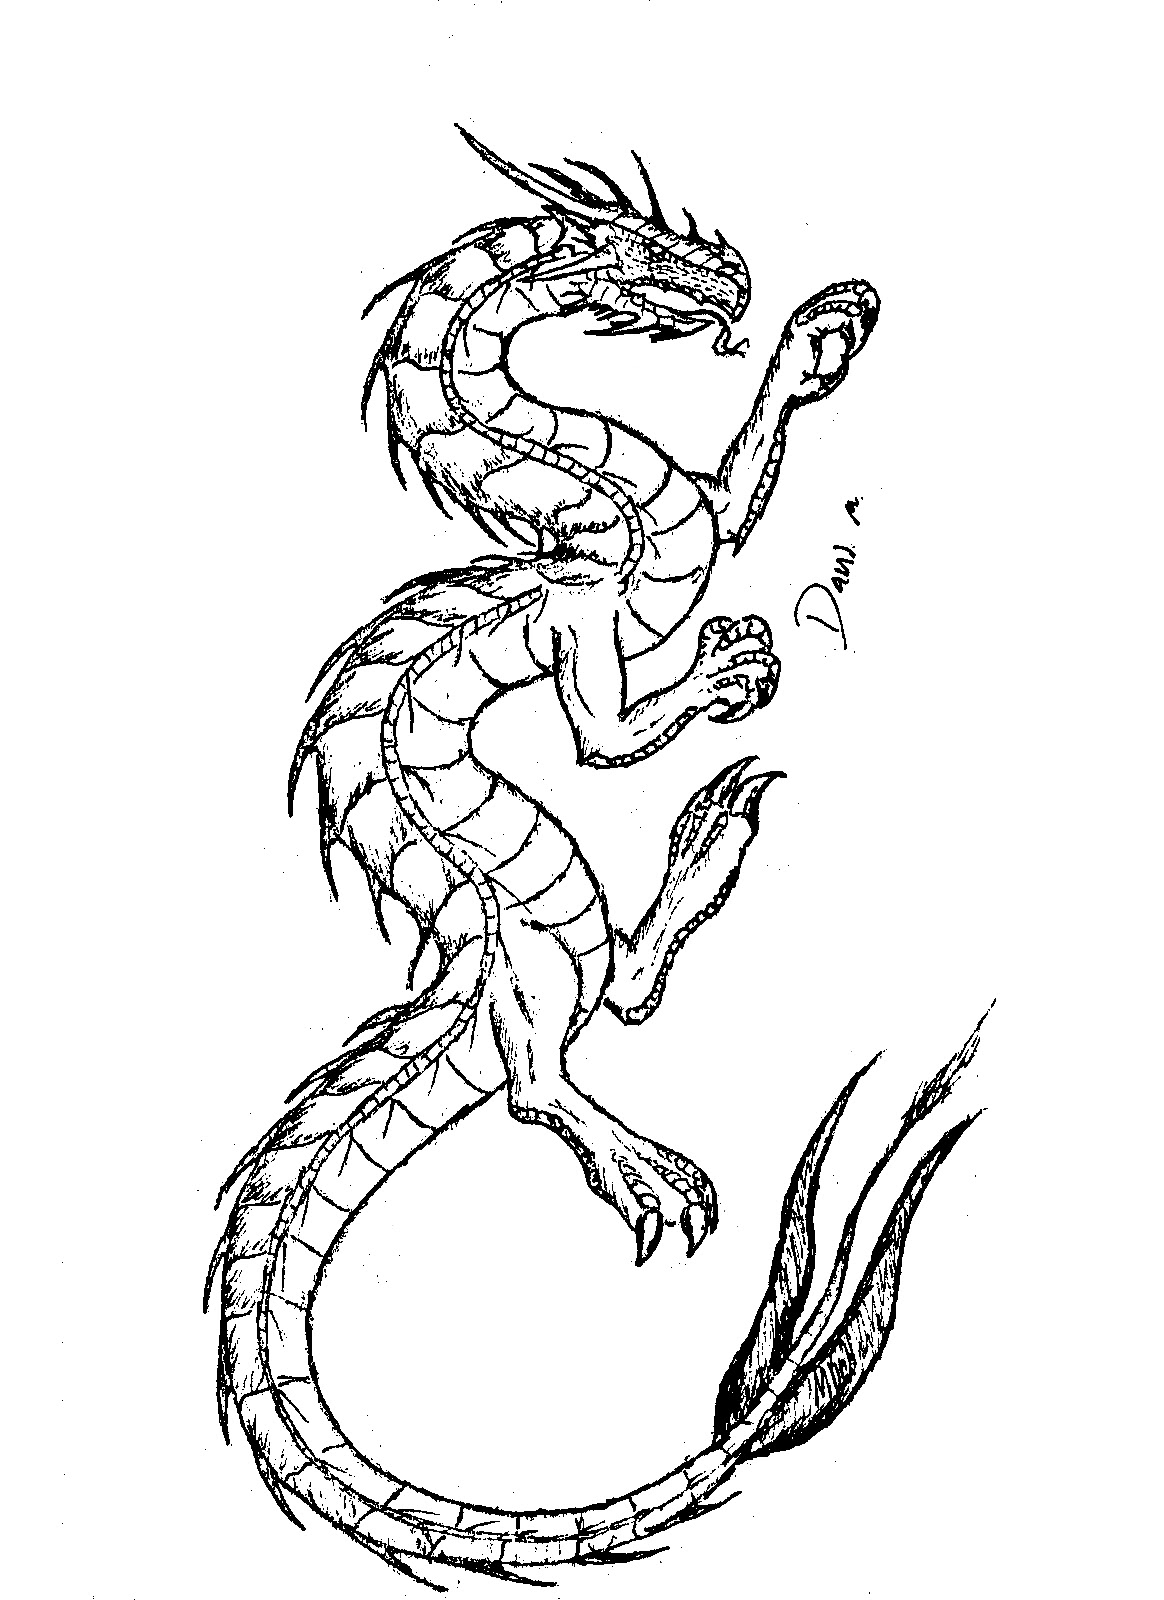 Coloring Page World Tattoo Dragon (Portrait)